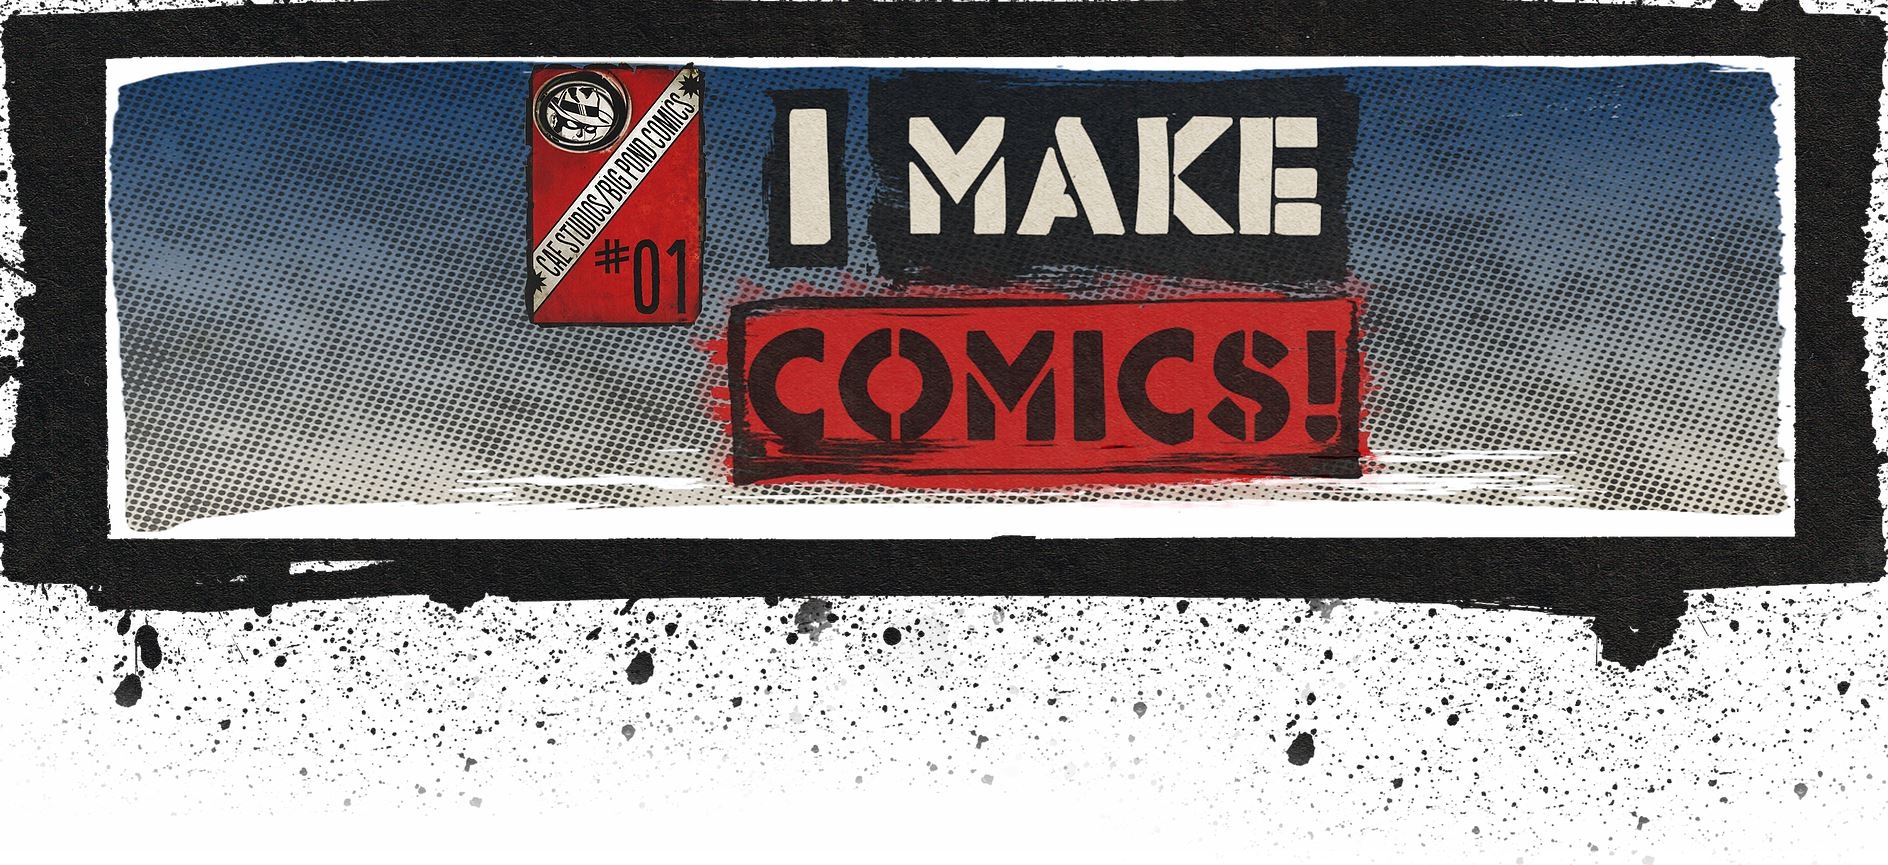 Martin Dunn asks Do you want to make Comics???? Well do you?? If so read this: